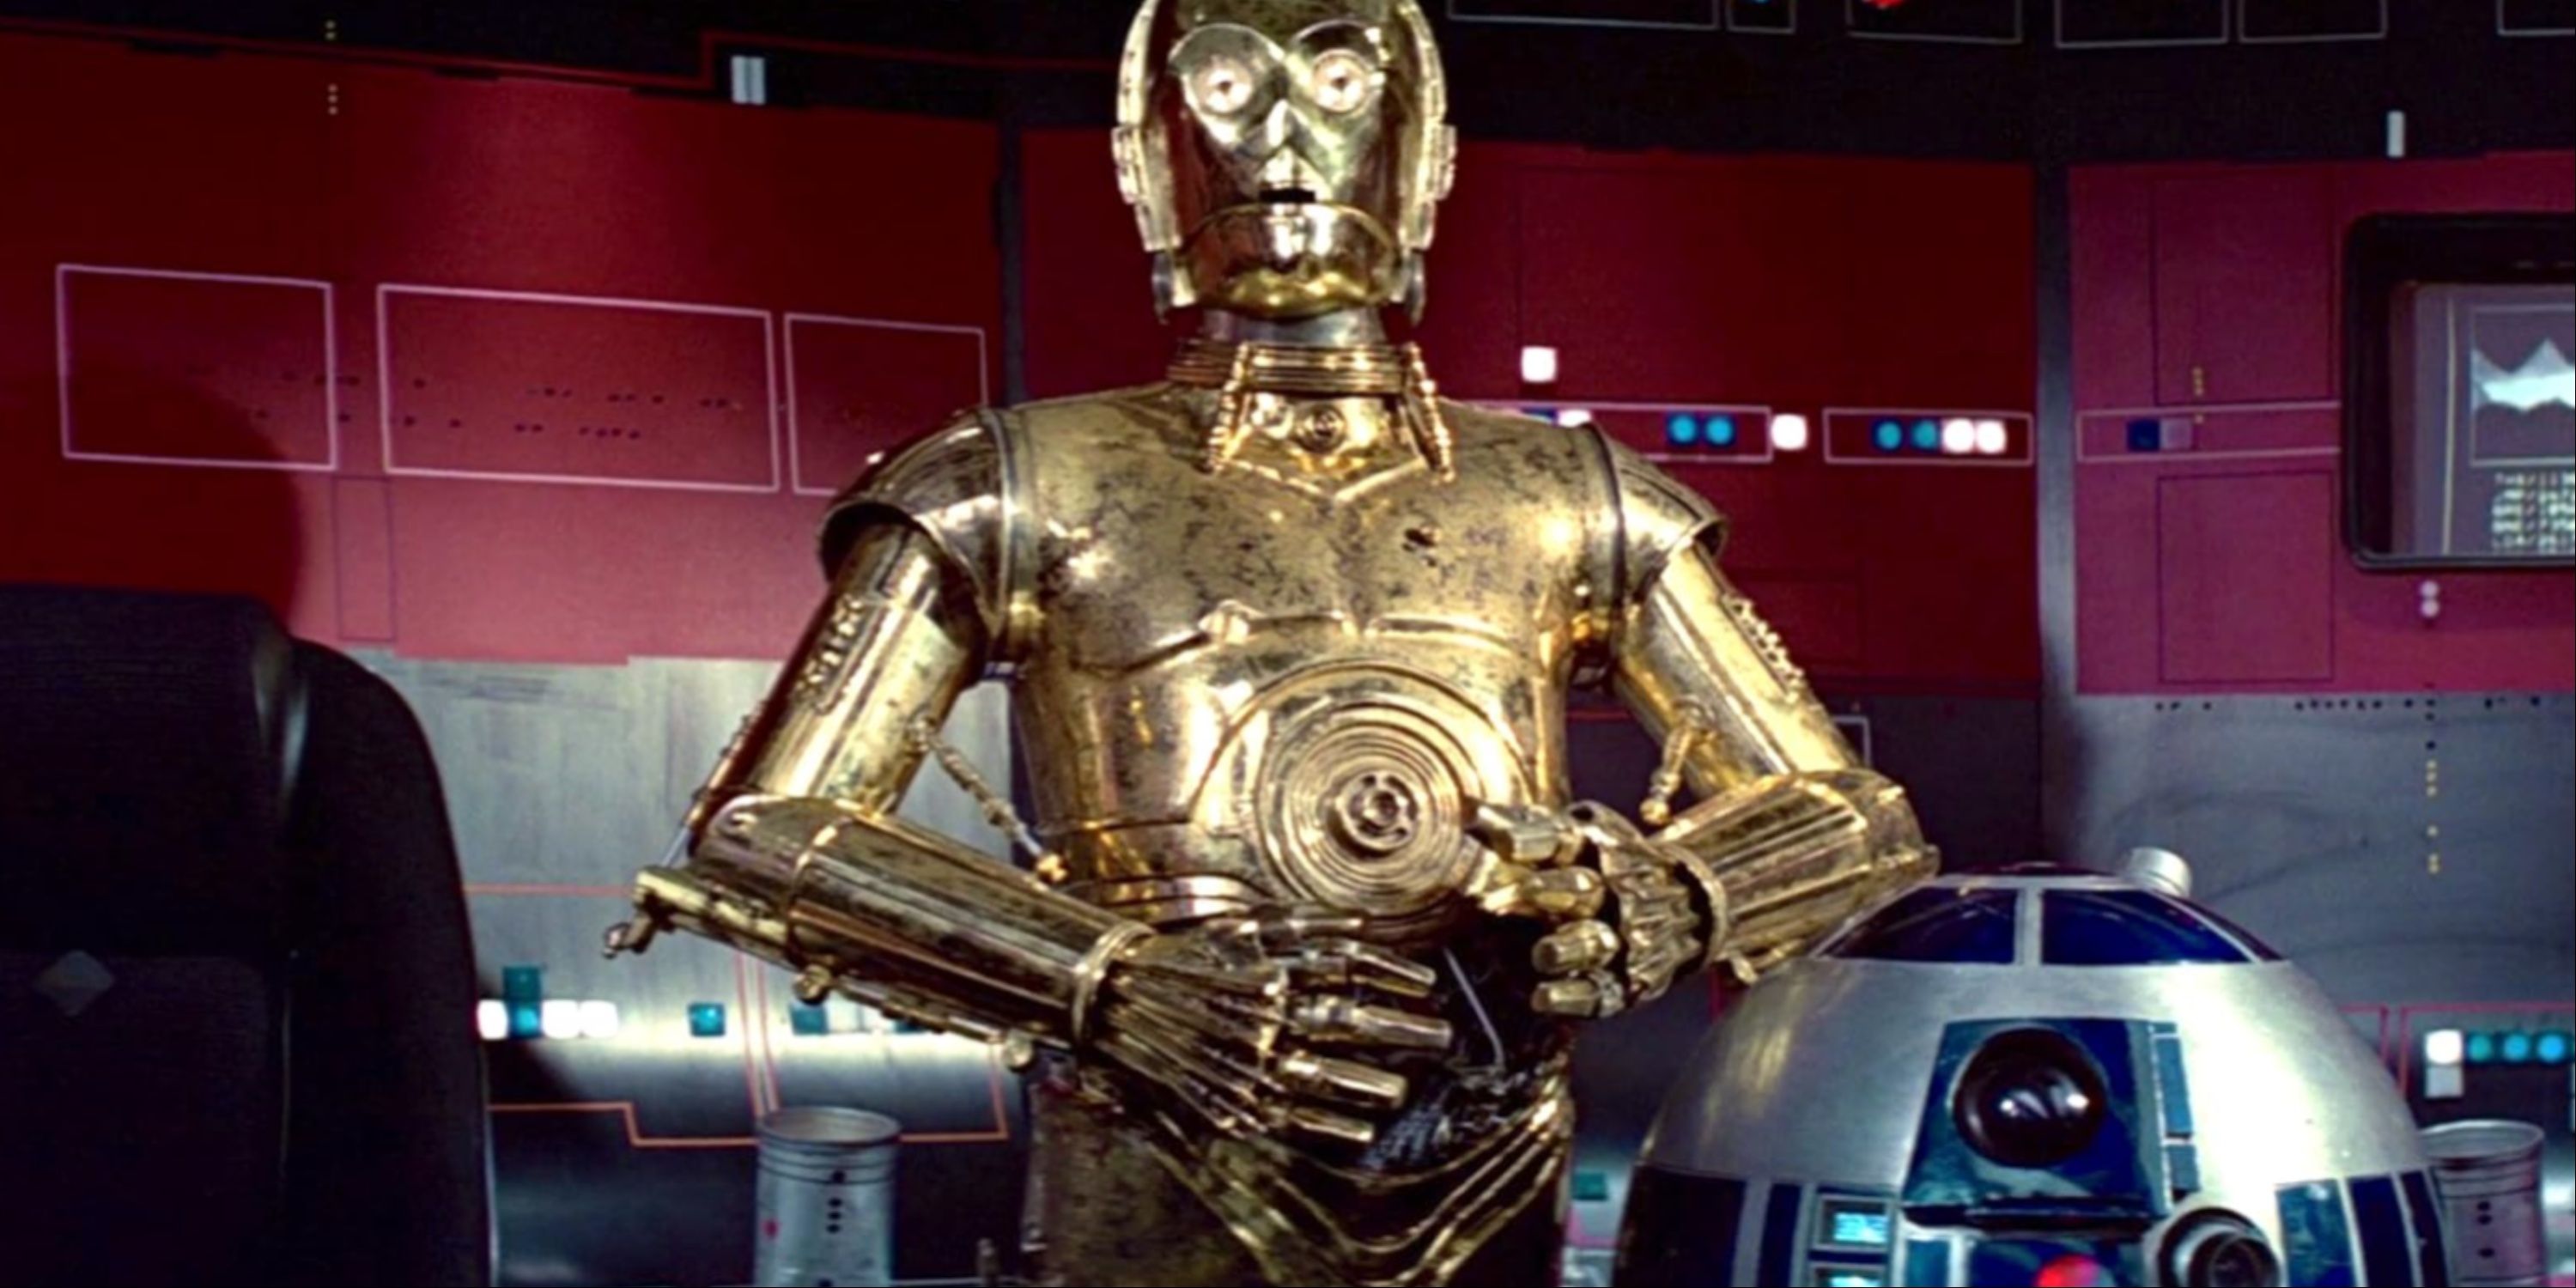 Star Wars Episode 4 A New Hope C-3PO And R2-D2 Together In The Control Room